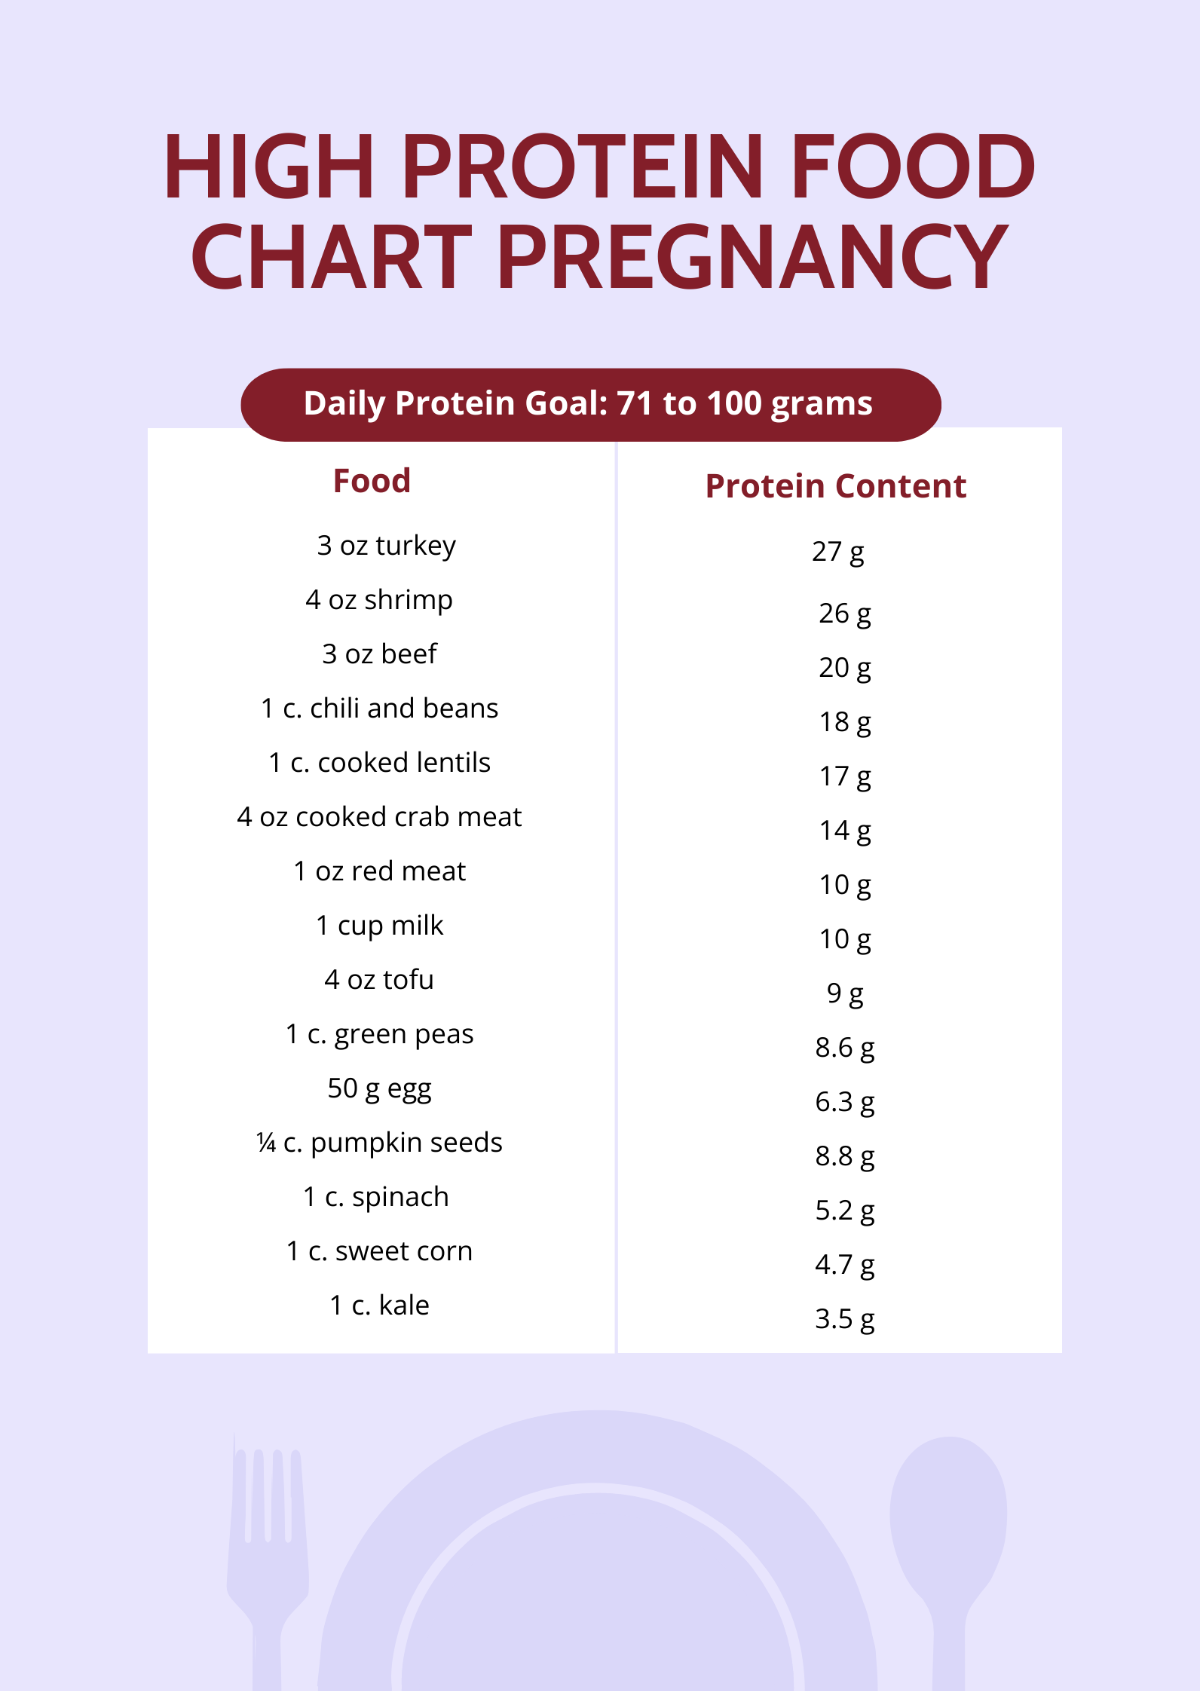 High Protein Food Chart Pregnancy Template